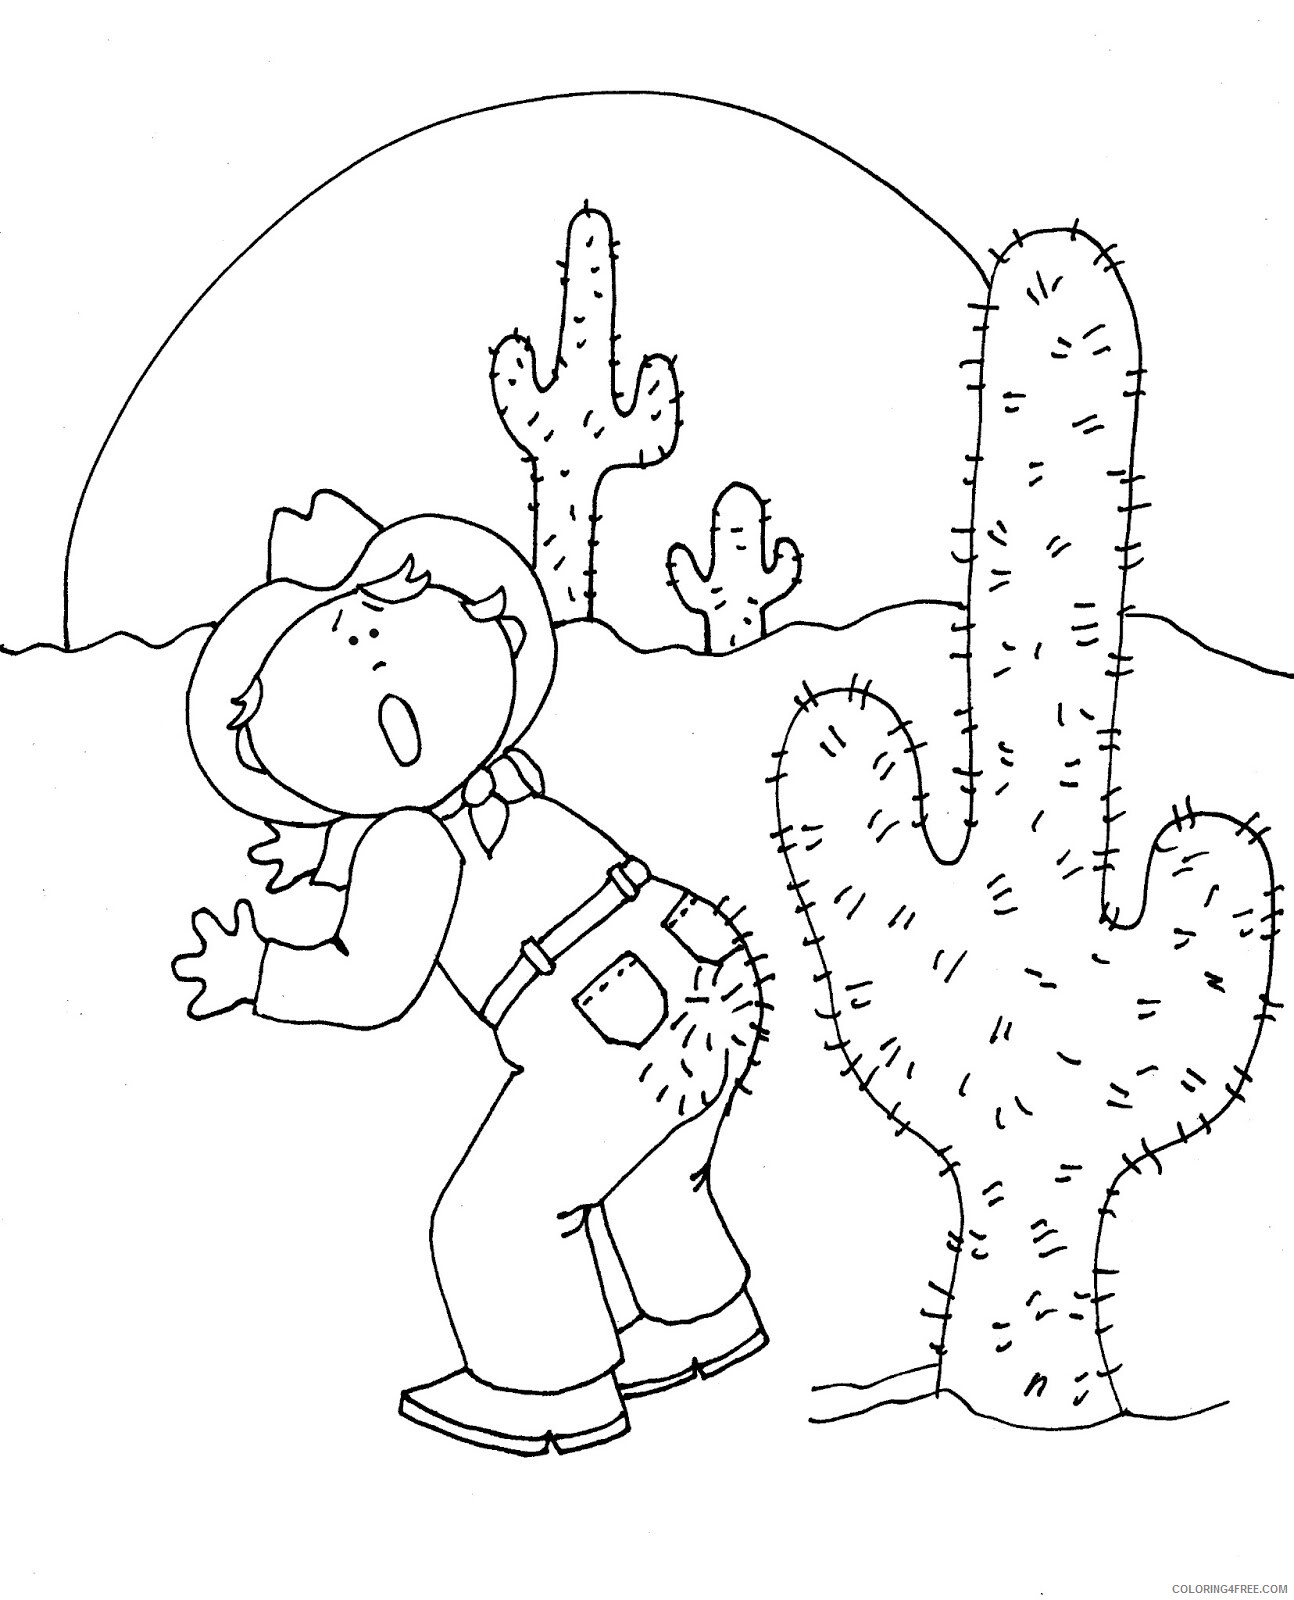 Cactus Coloring Pages Flowers Nature Free Cactus Printable 2021 047 Coloring4free